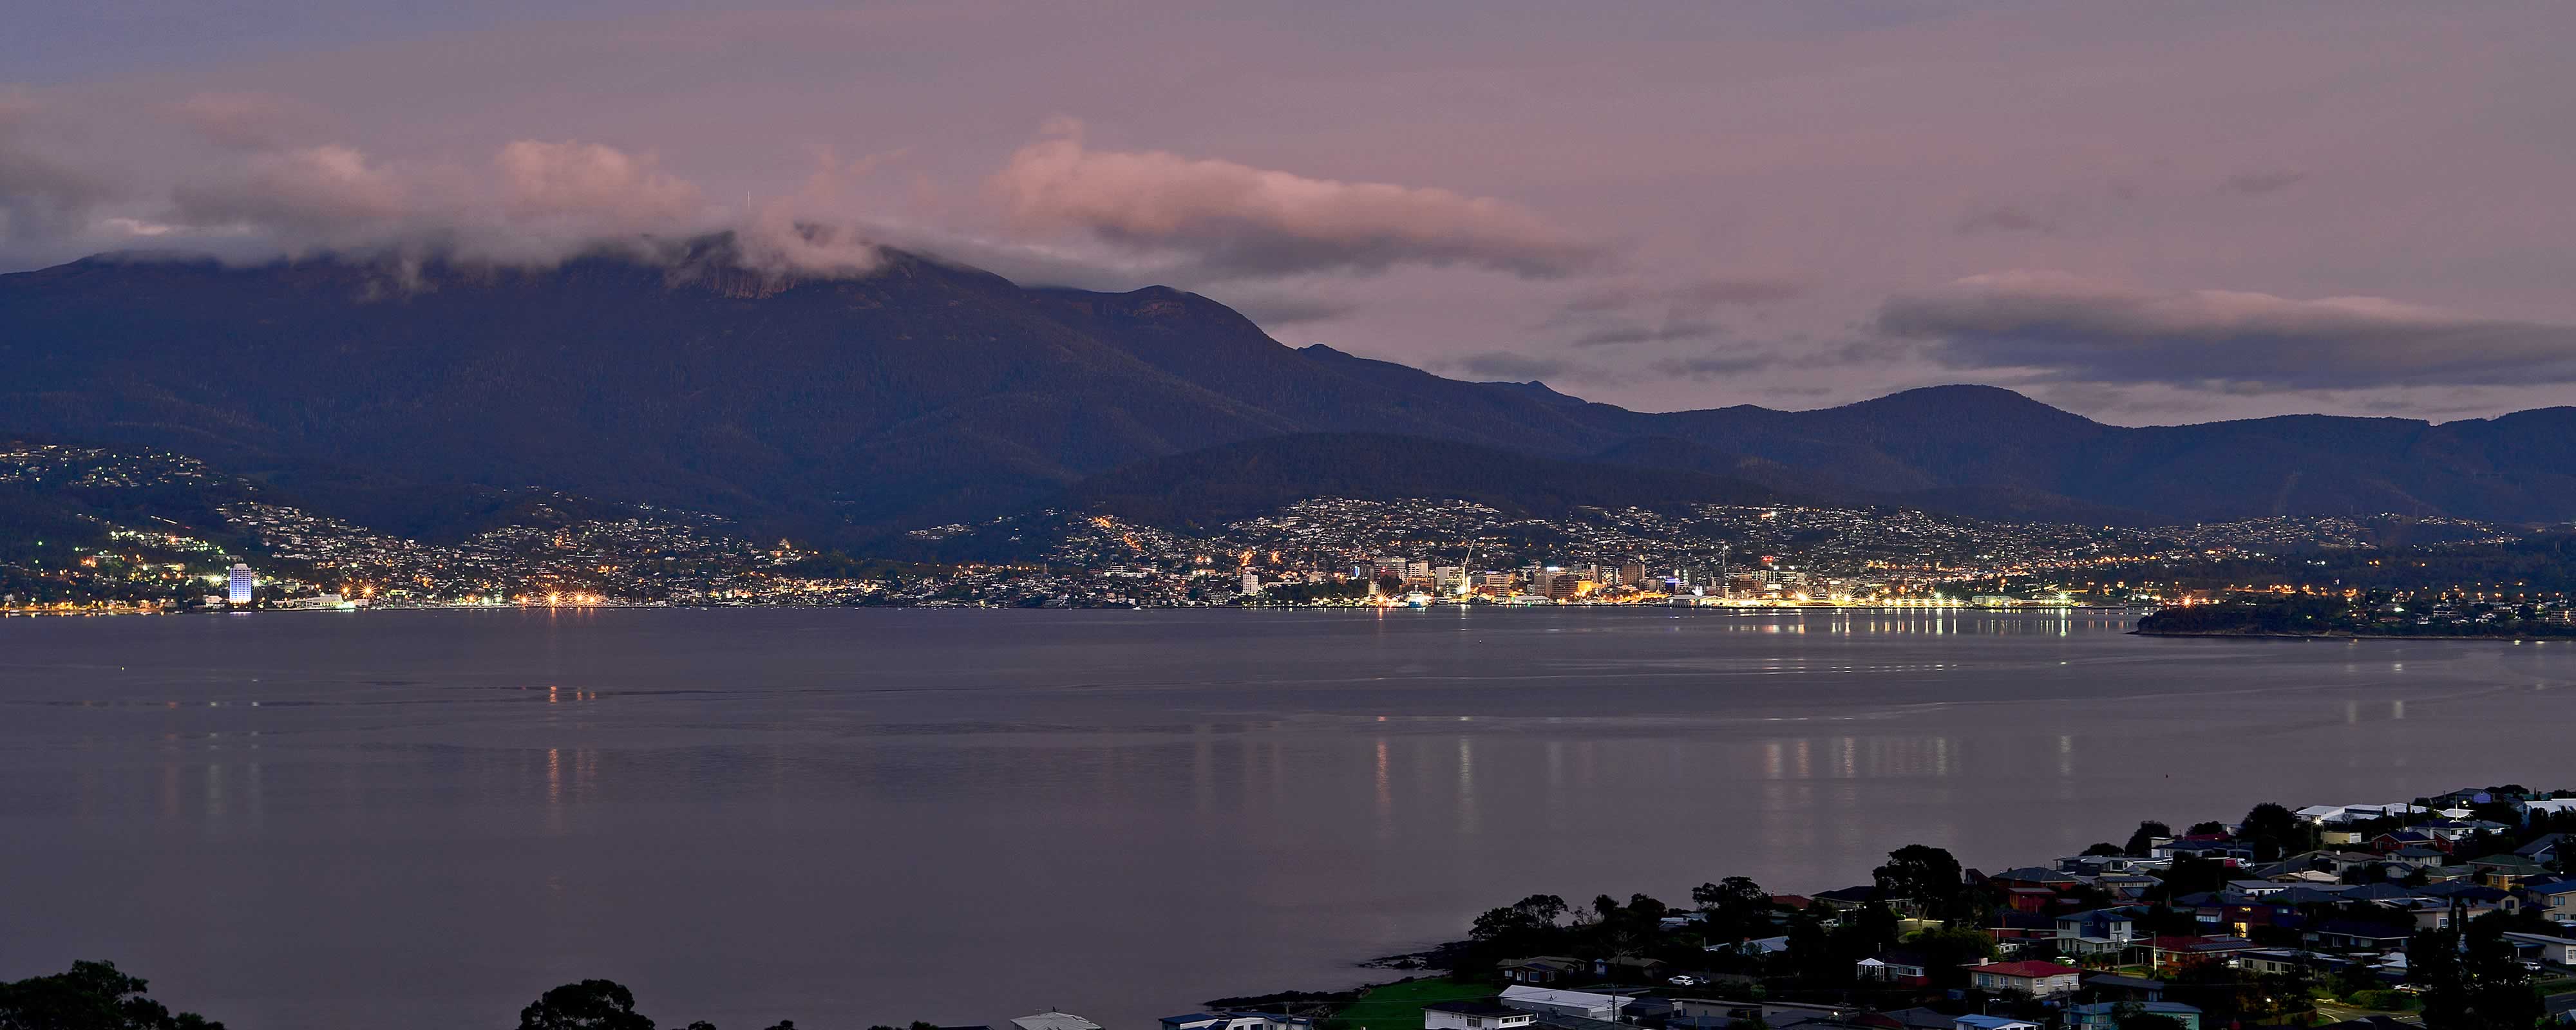 Night time view from Tunah Street looking across the River Derwent with clouds on kunanyi / Mount Wellington in the distance. Photo: Owen Fielding.